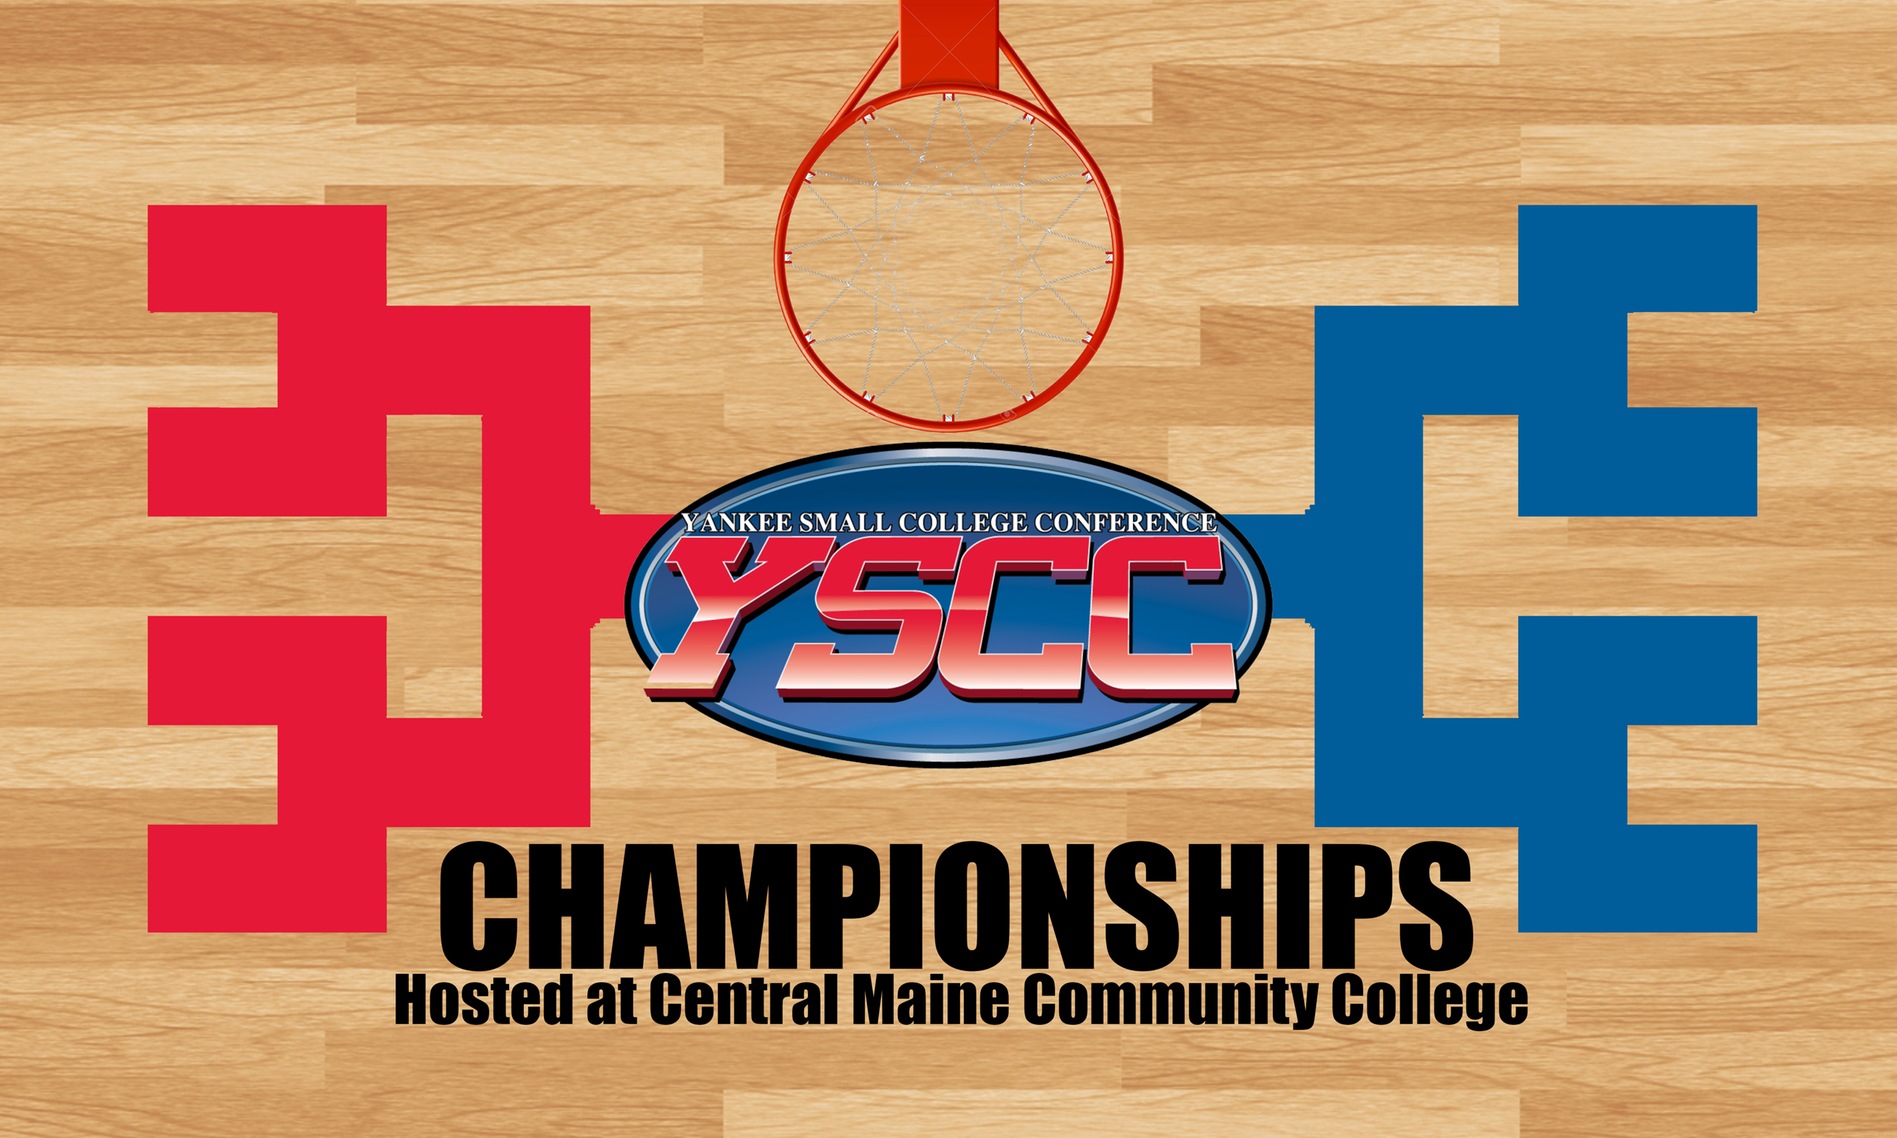 Yankee Conference Final Four Tournament kicks off Saturday